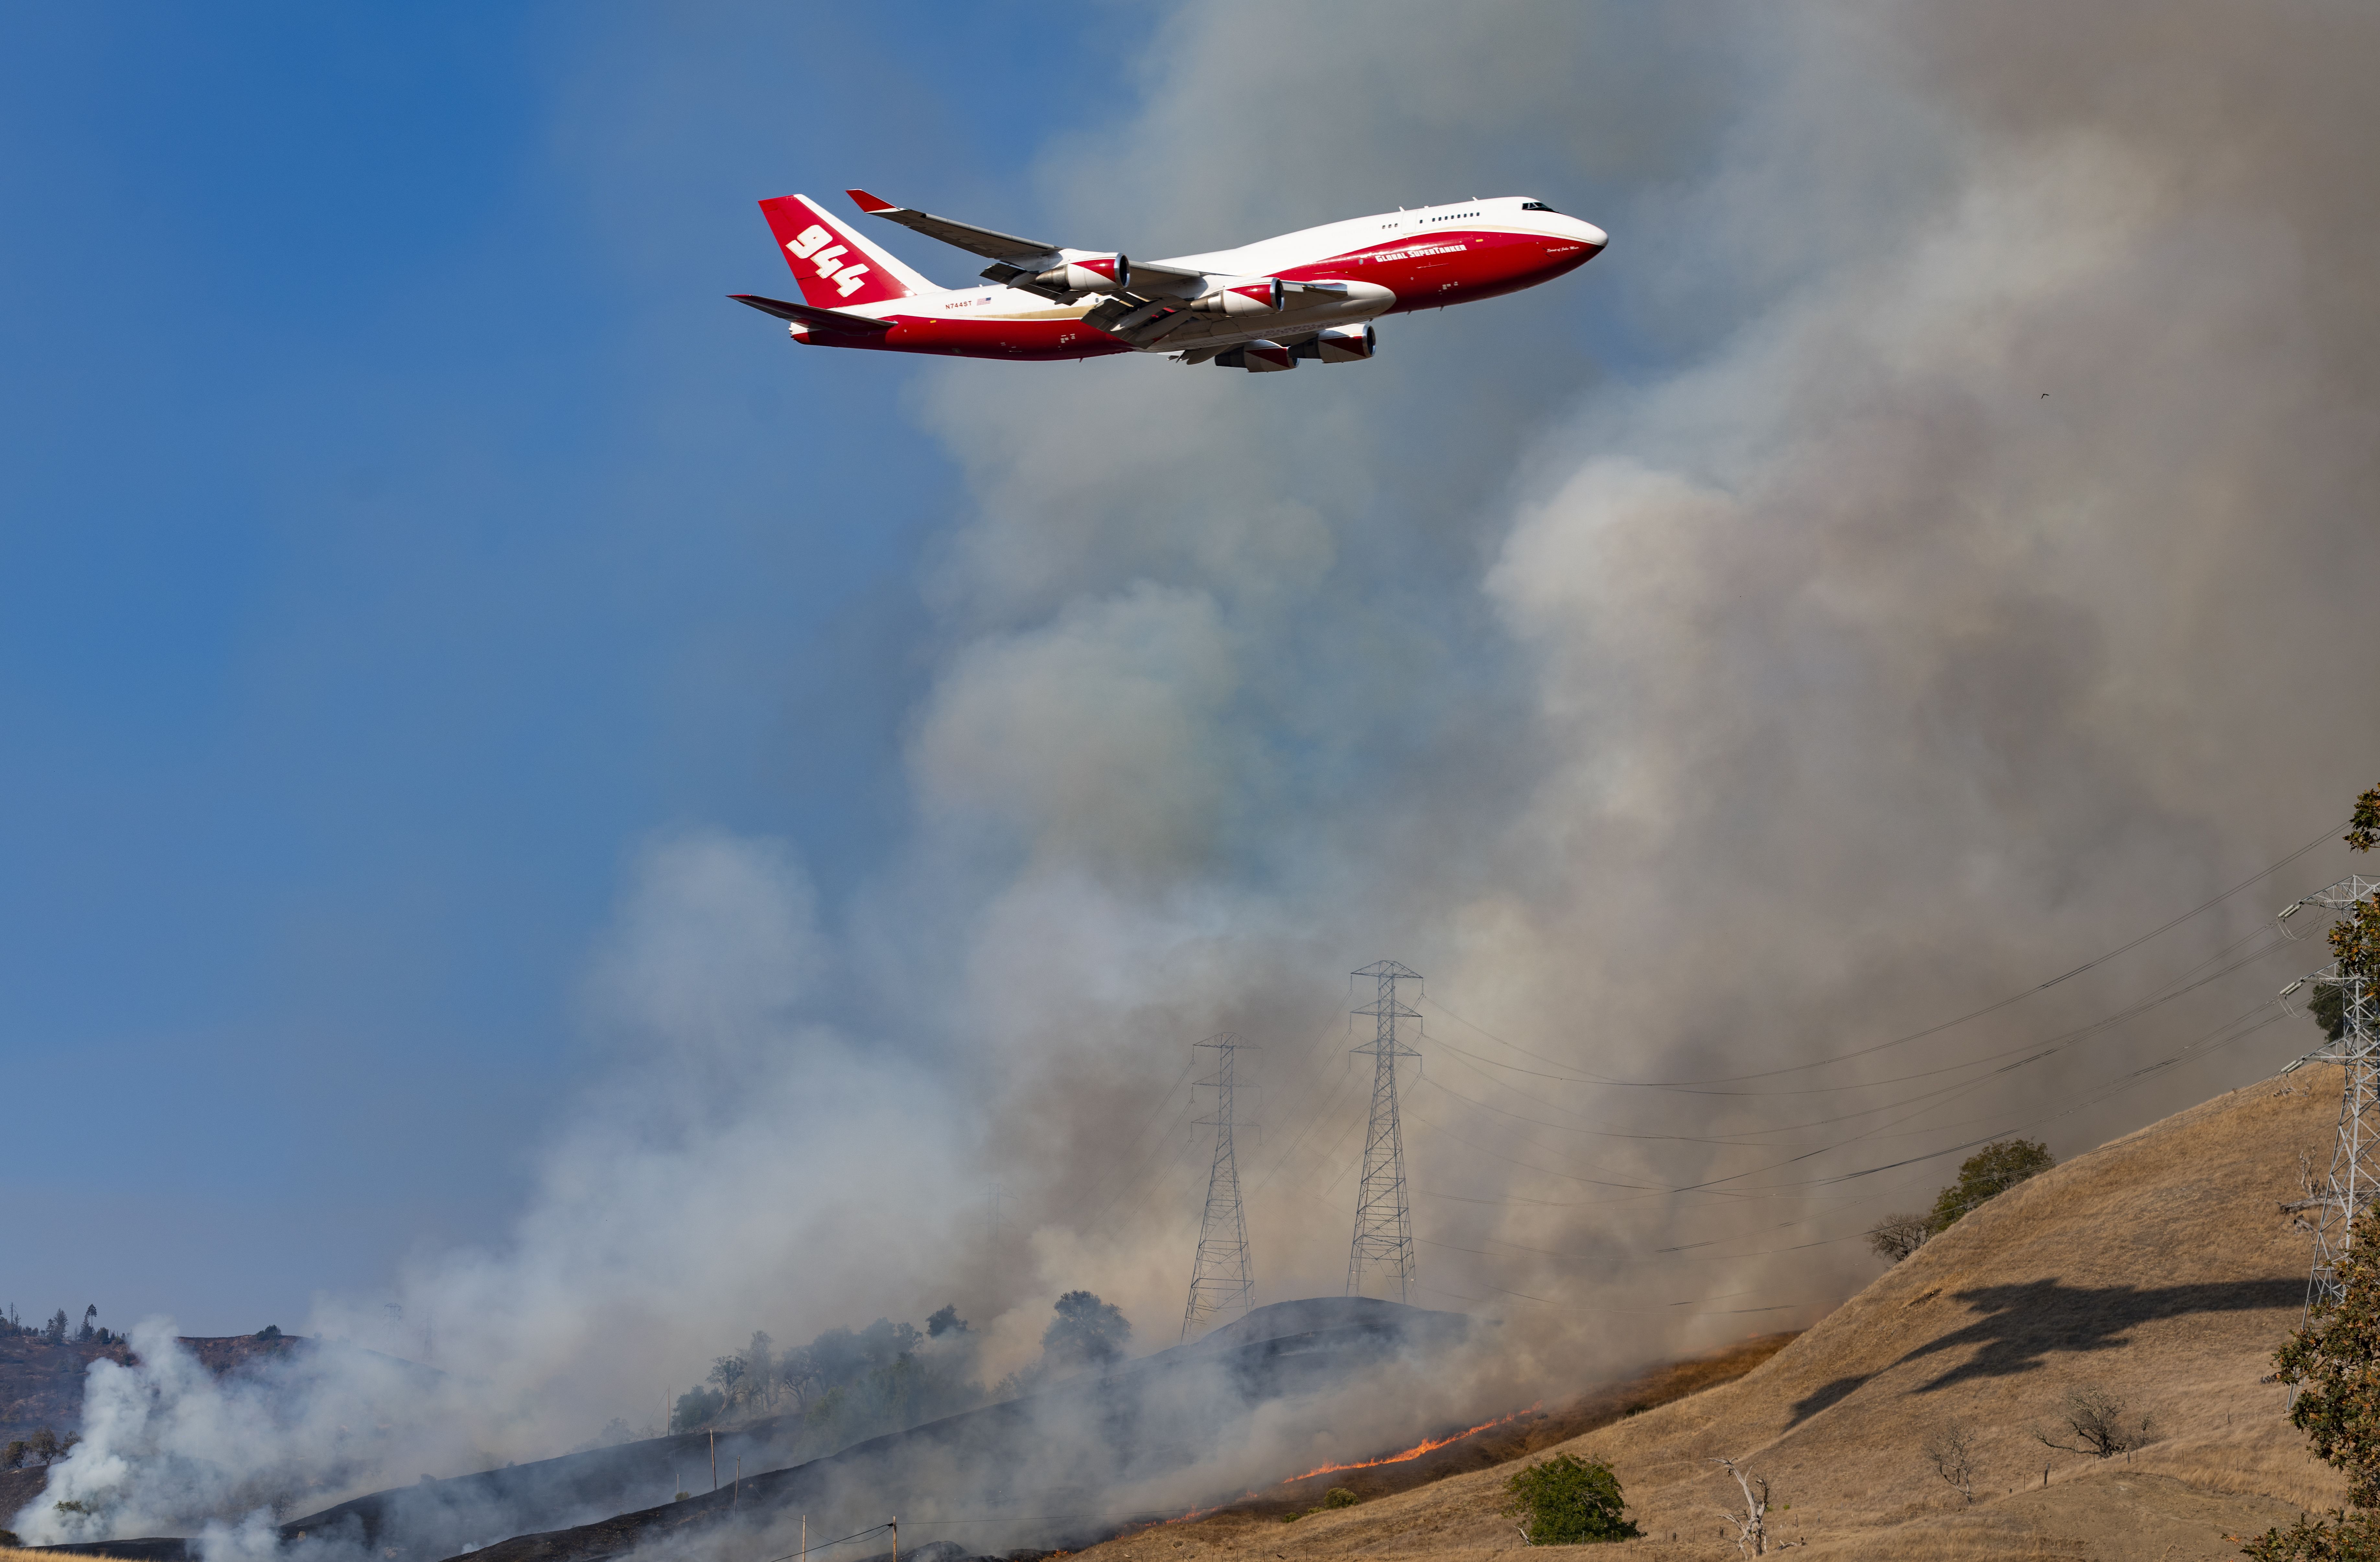 A fire fighting air tanker flies over the power transmission towers, which are engulfed in back fire set by the firefighters in an effort to control the fire in Geyserville